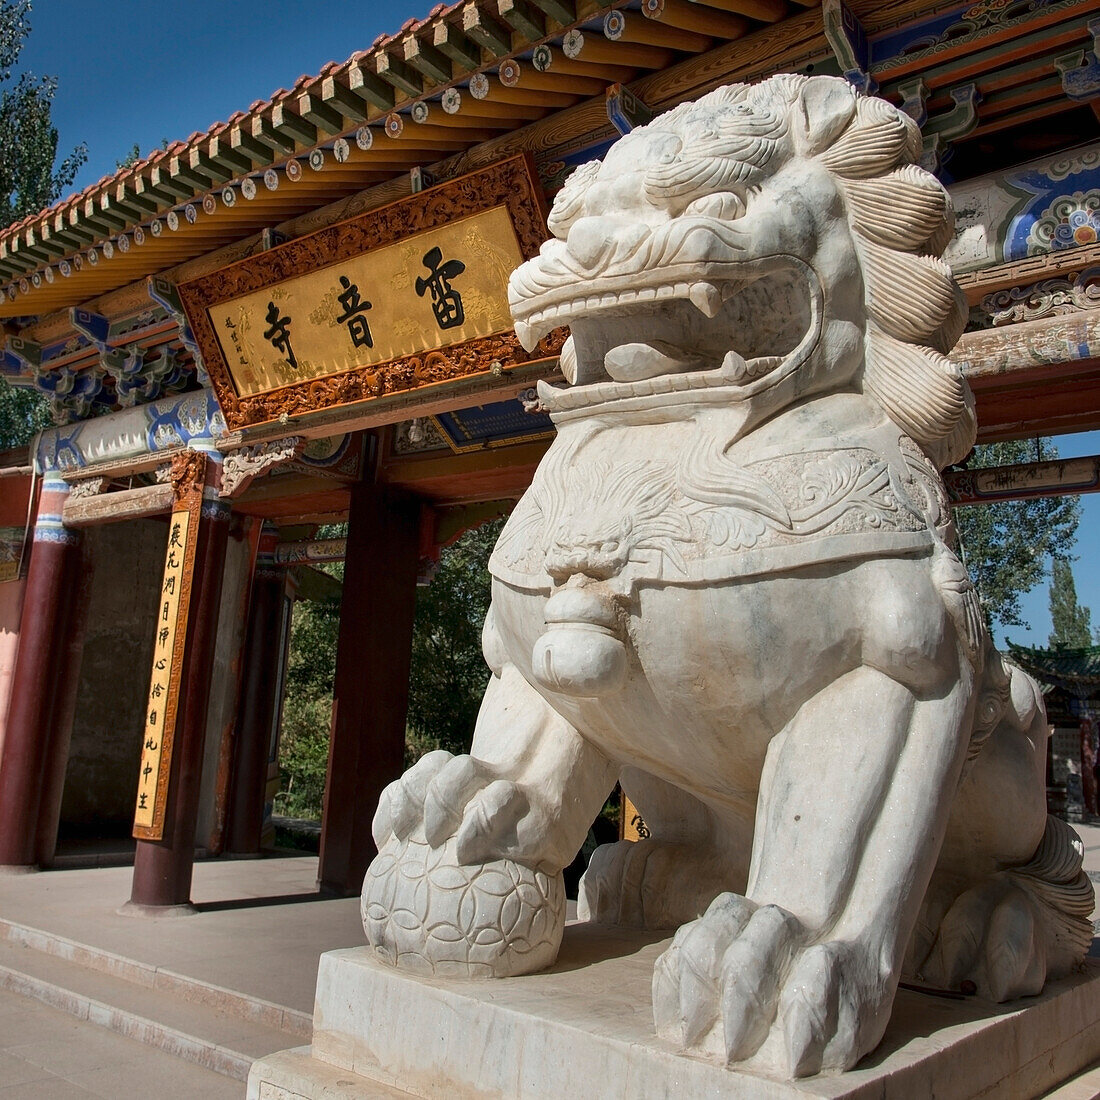 Close up of a lion statue outside a building in traditional japanese architecture